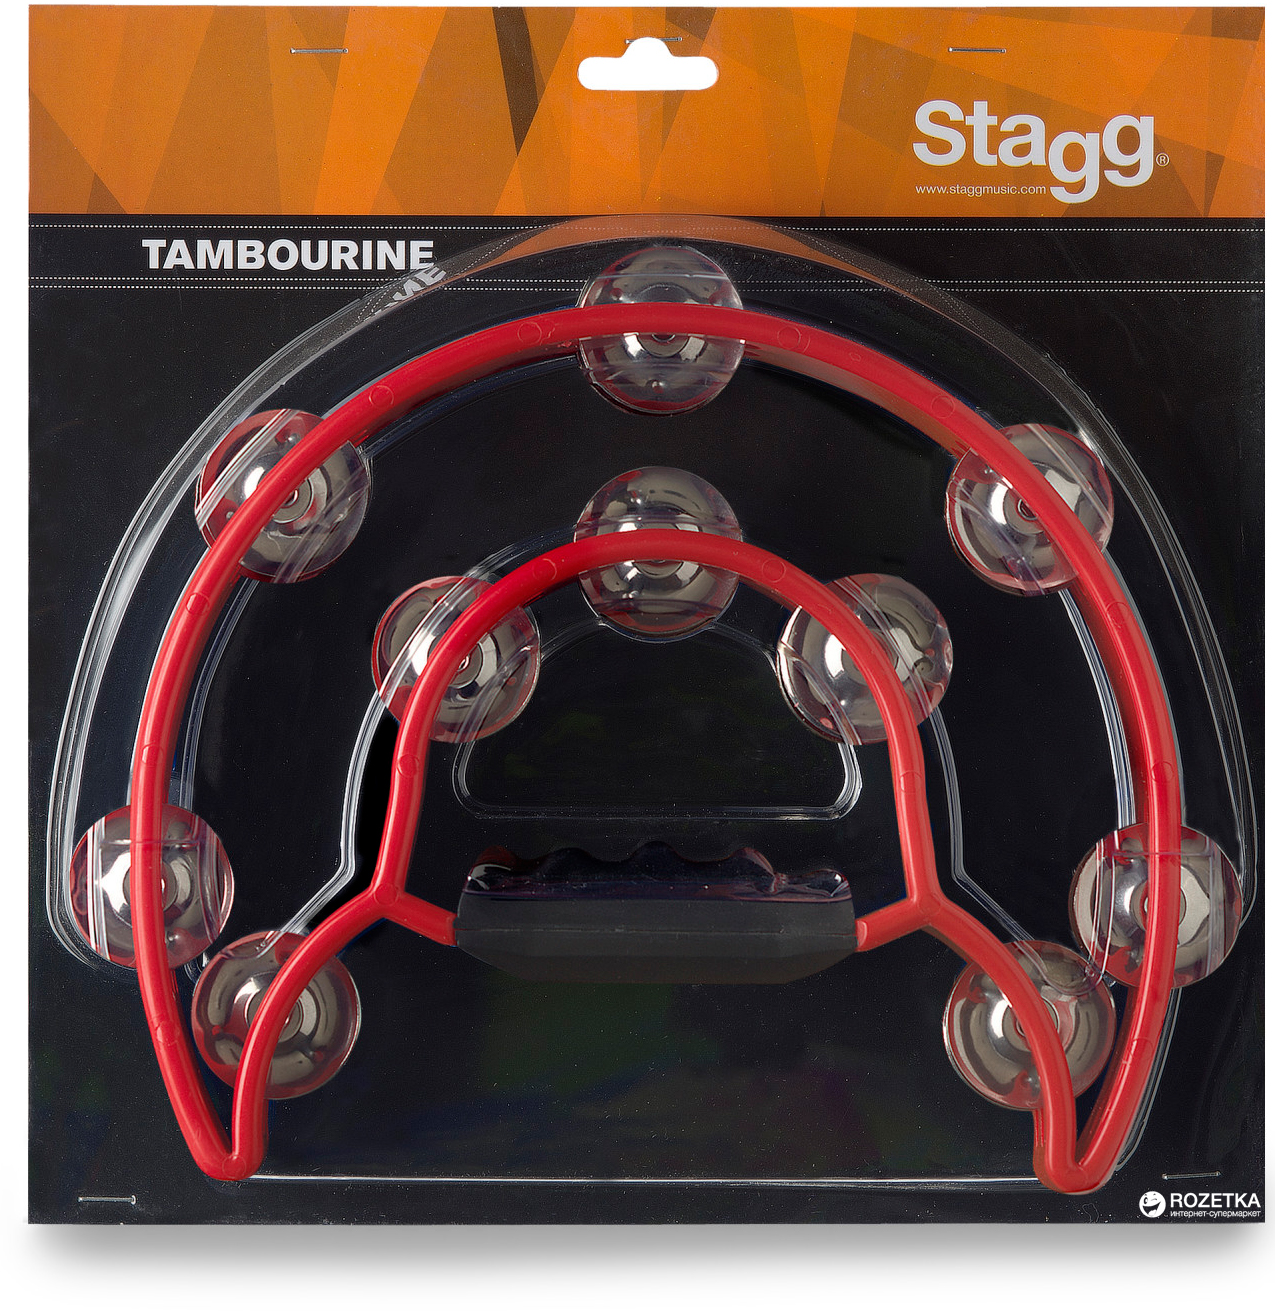 Stagg Tab-1 Rd Tambourin En Plastique Avec 20 Cymbalettes Rouge - Percussions À Secouer - Variation 1